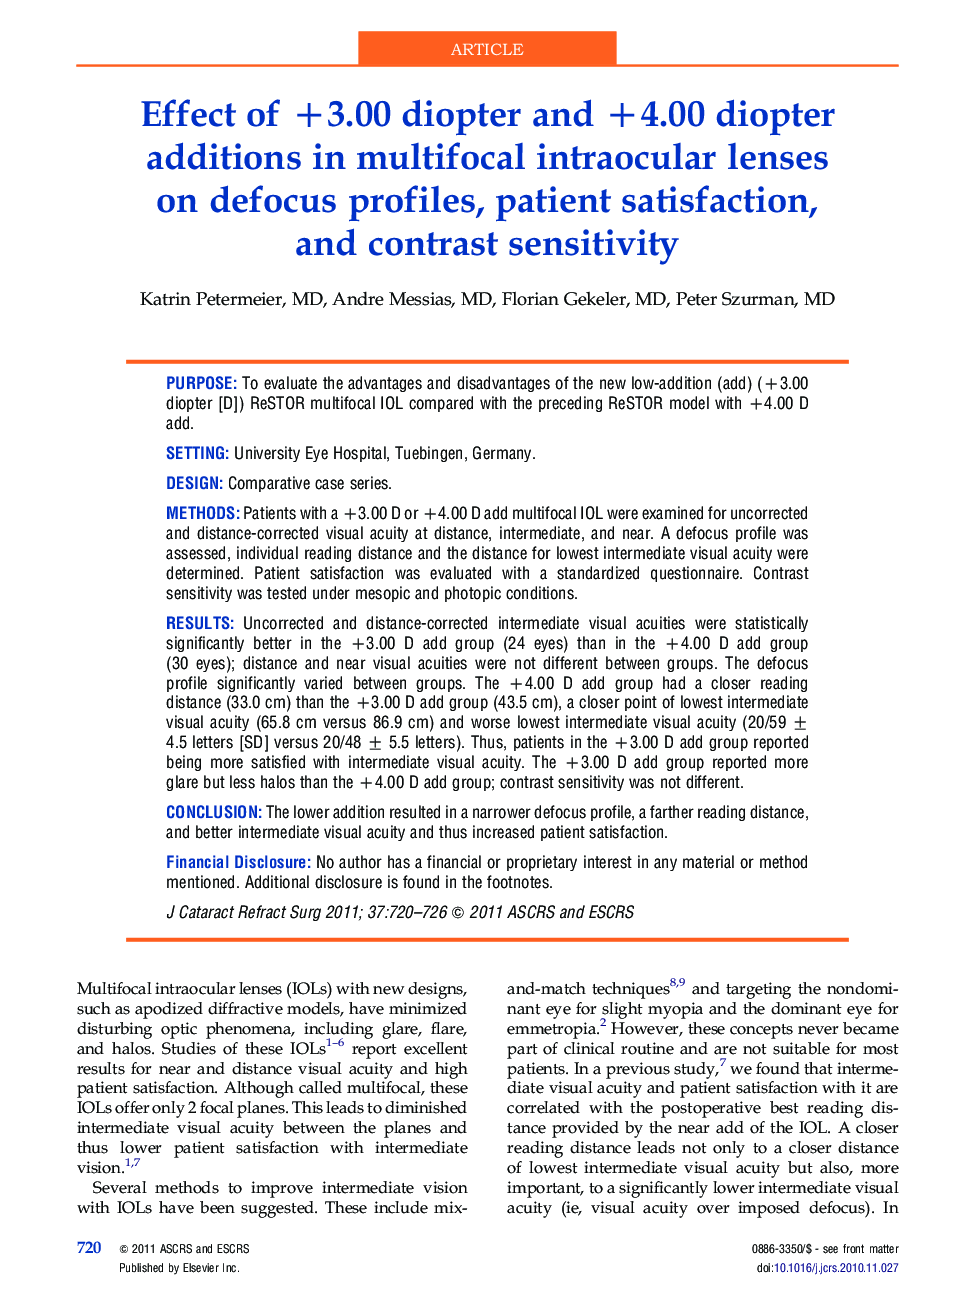 Effect of +3.00 diopter and +4.00 diopter additions in multifocal intraocular lenses on defocus profiles, patient satisfaction, and contrast sensitivity 